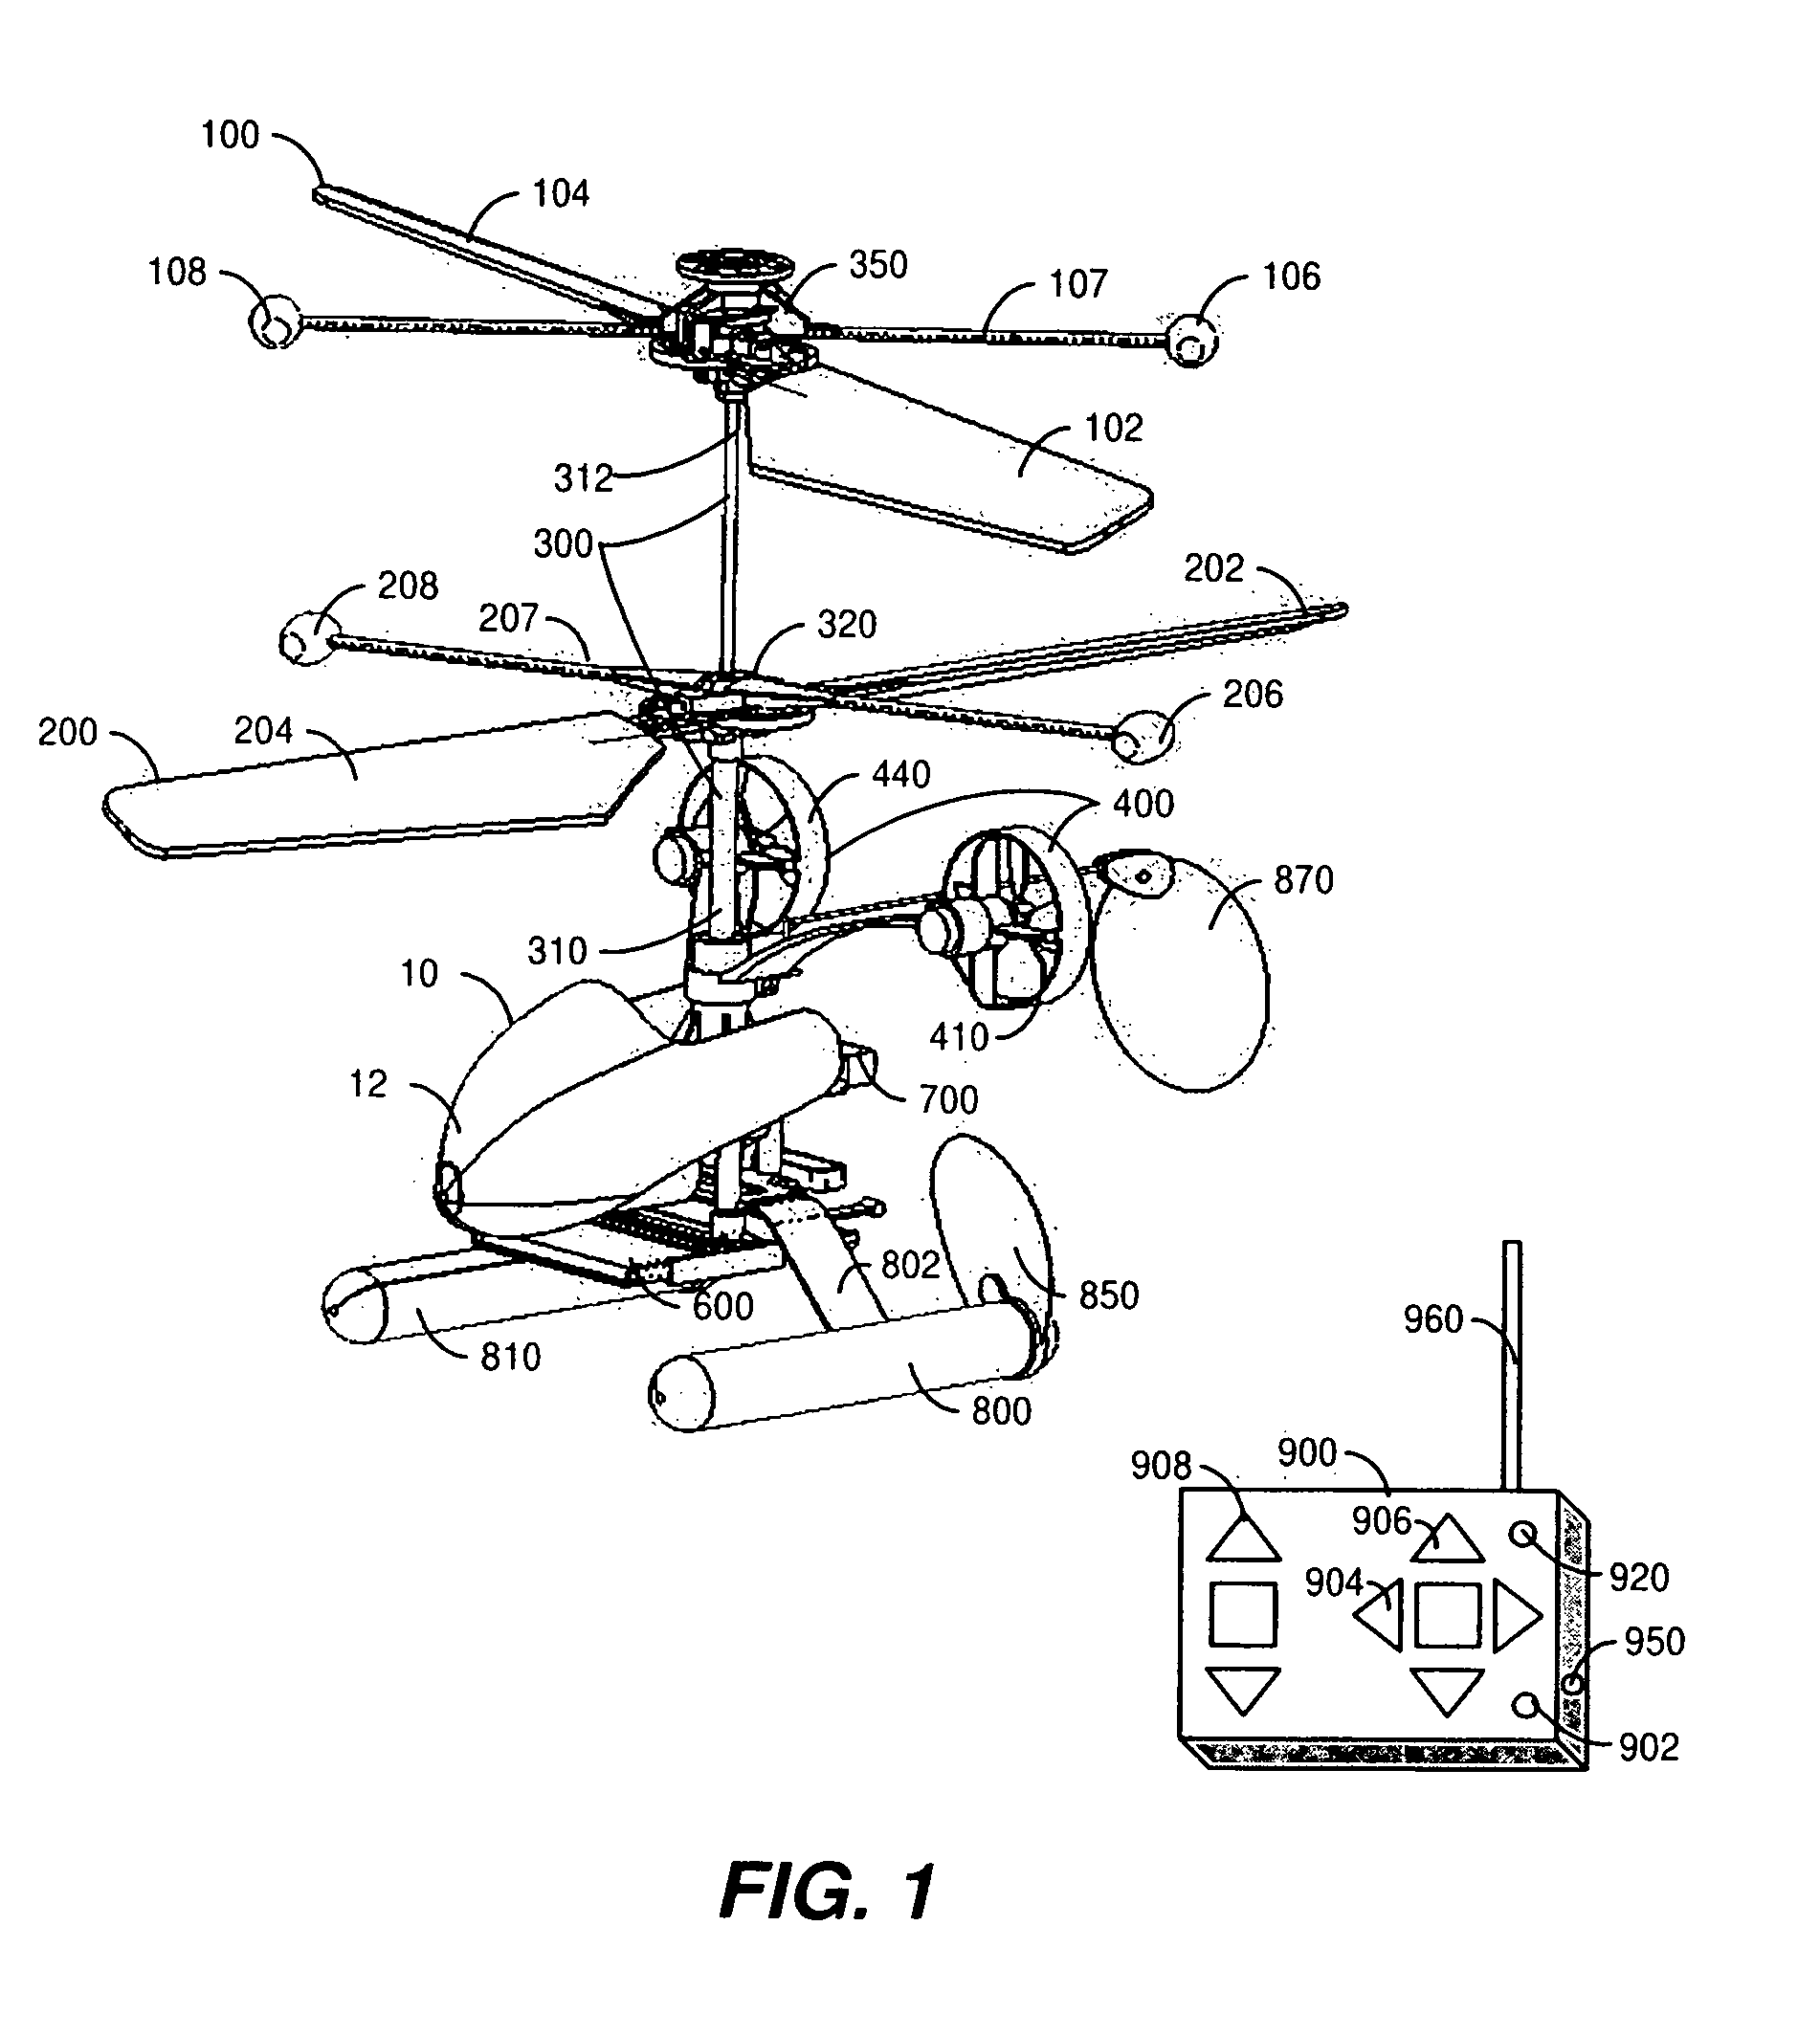 Rotary-wing vehicle system